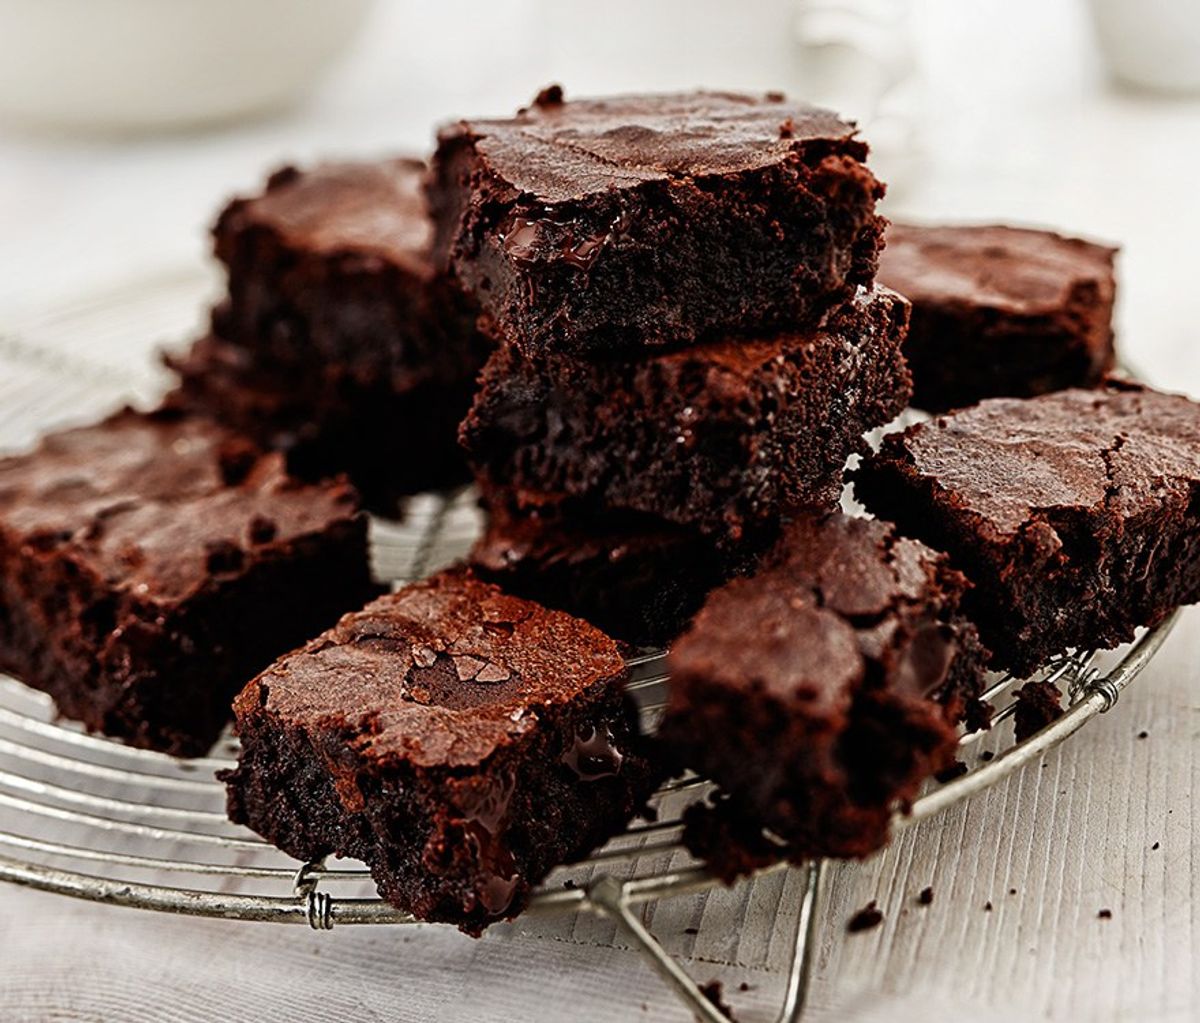 A Dummies How To: Bake Brownies